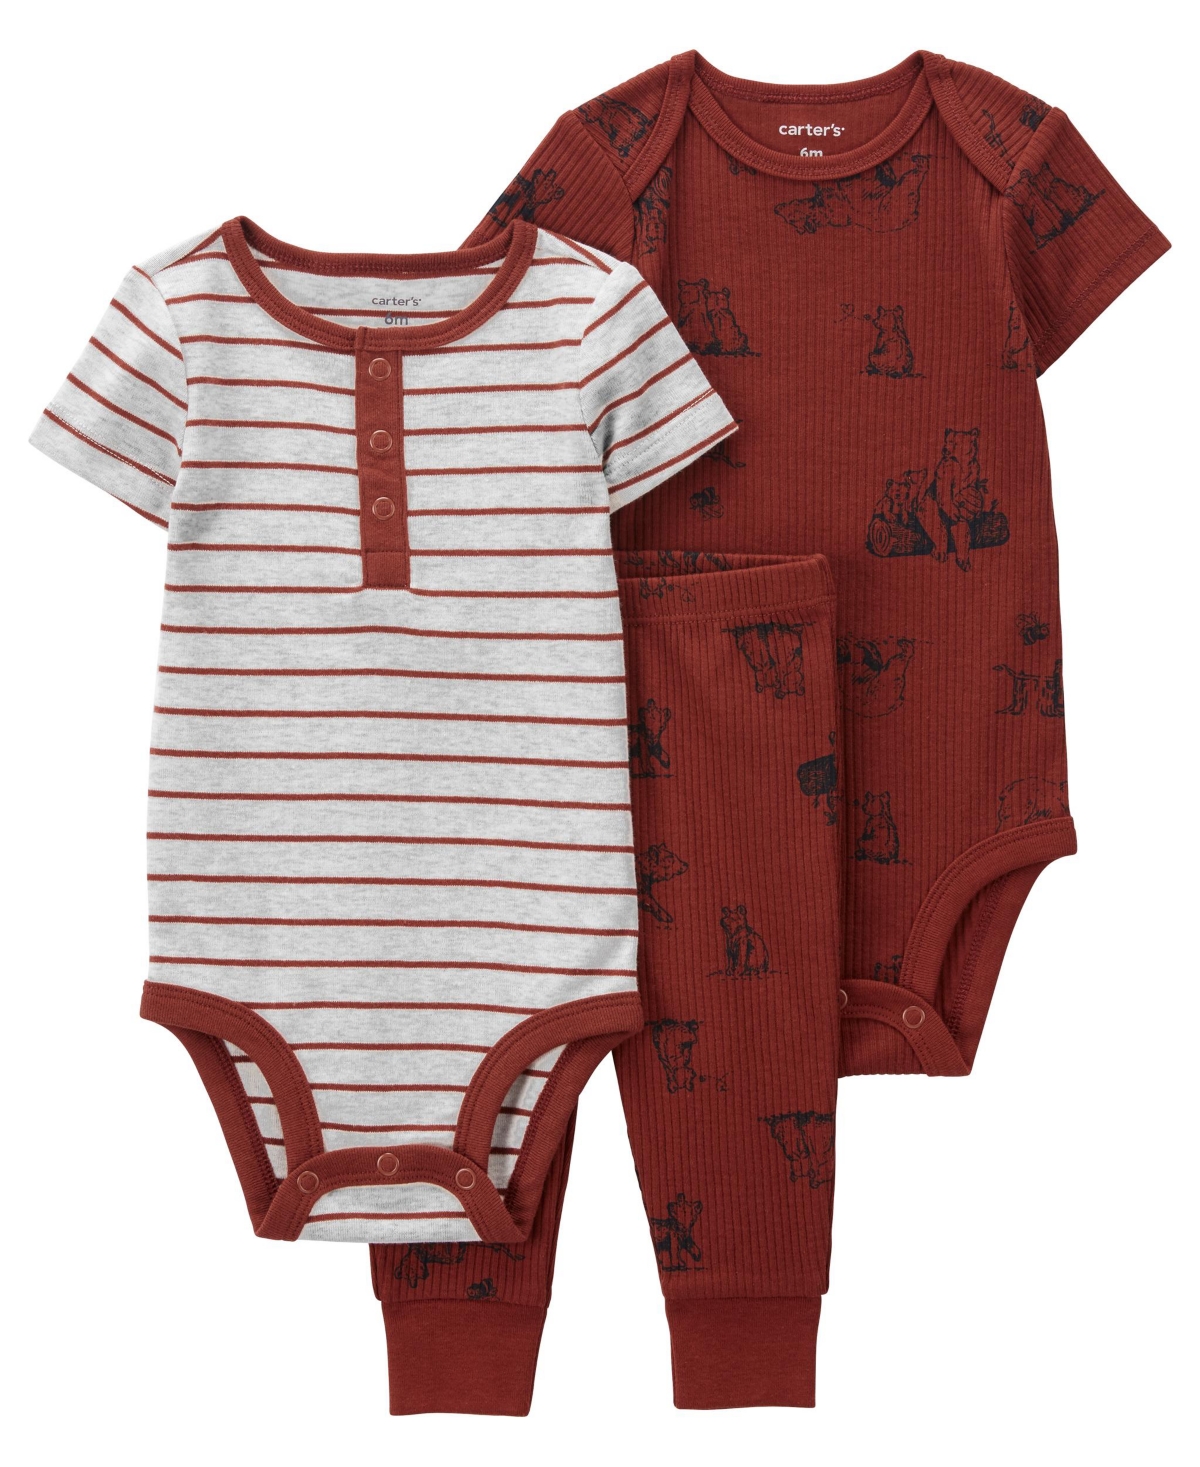 Carter's Baby Boys Bodysuits And Pants, 3 Piece Set In Red